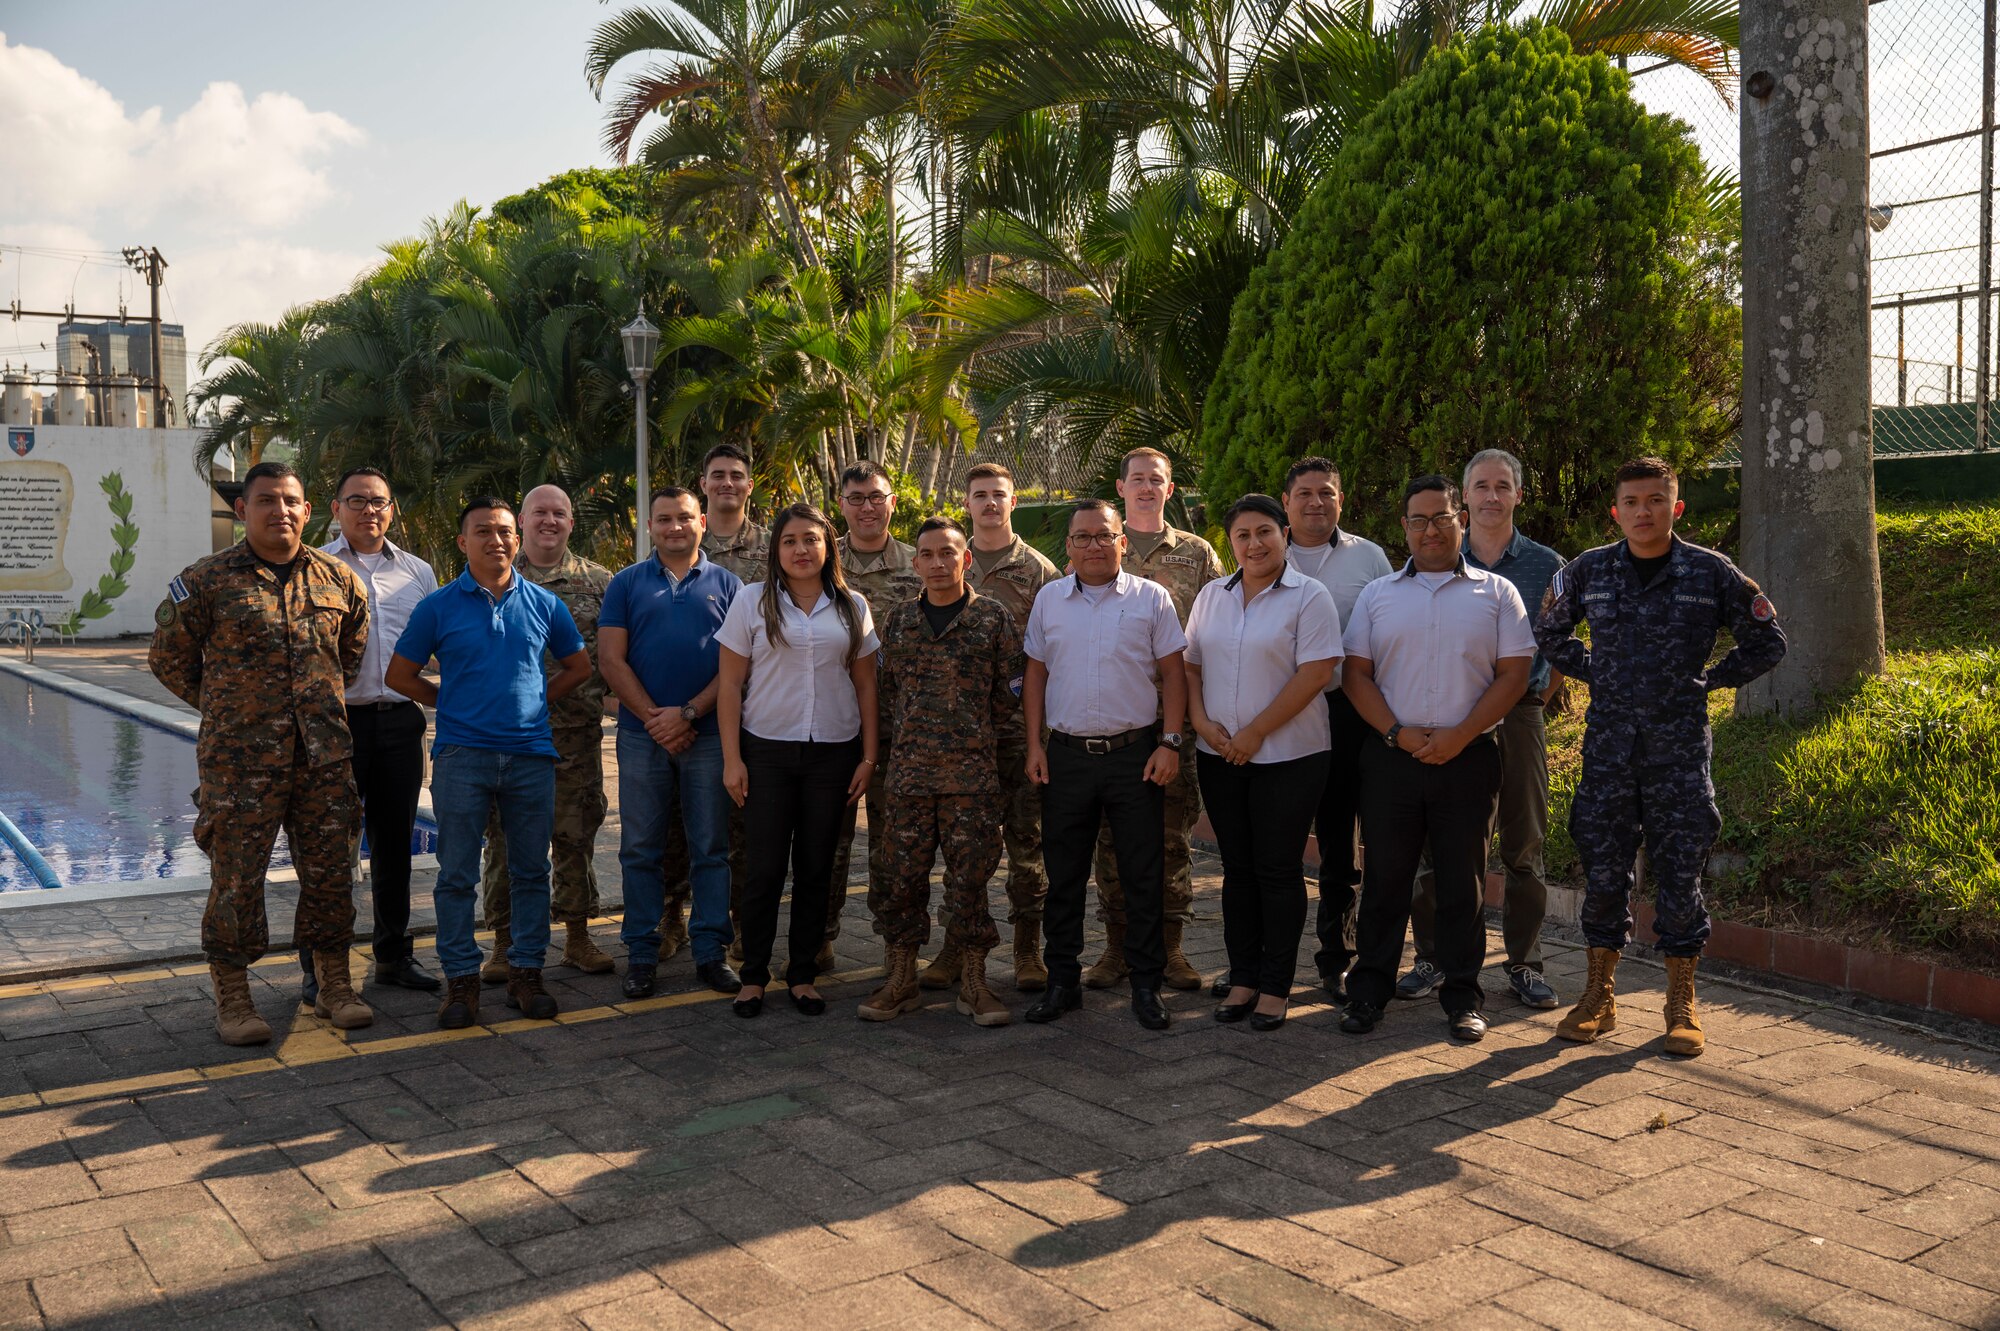 Group photo at the computerized tactical training center in San Salvador.